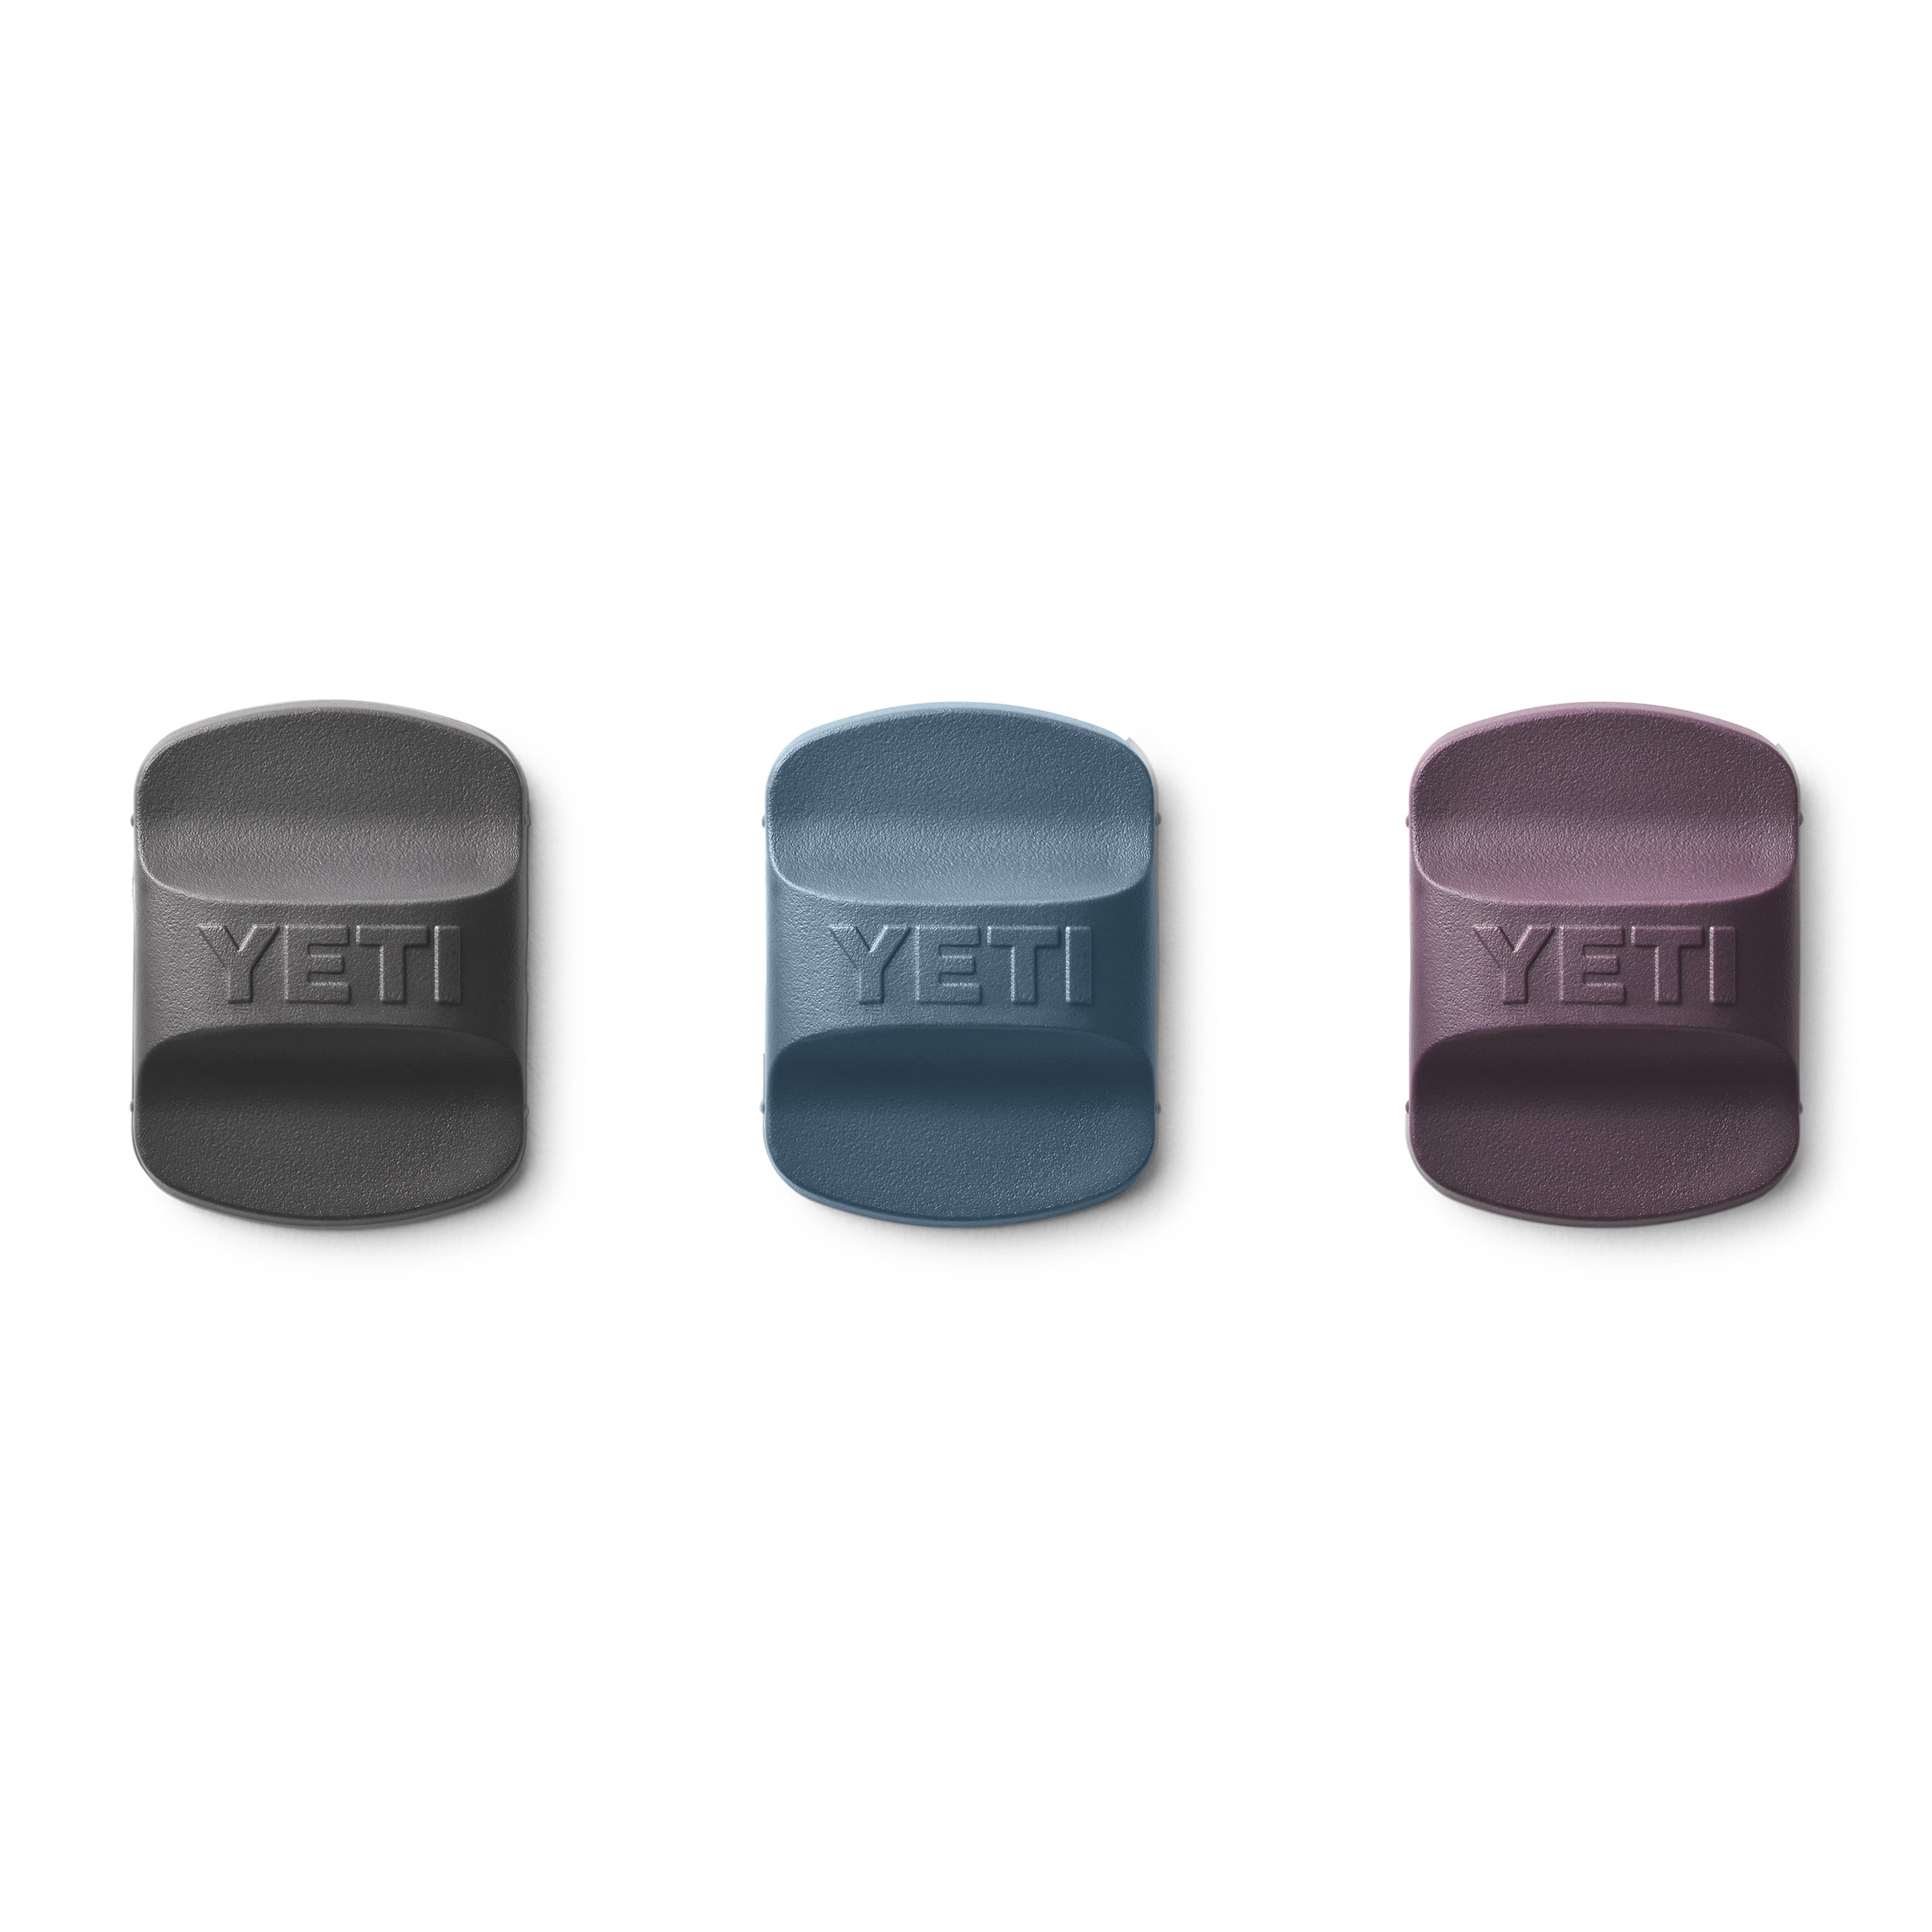 Wotermly 4 Pack Yeti Magslider Yeti Magnetic Slider Replacement, Yeti  Replacement Magslider Block, Black,Red,Purple and Blue